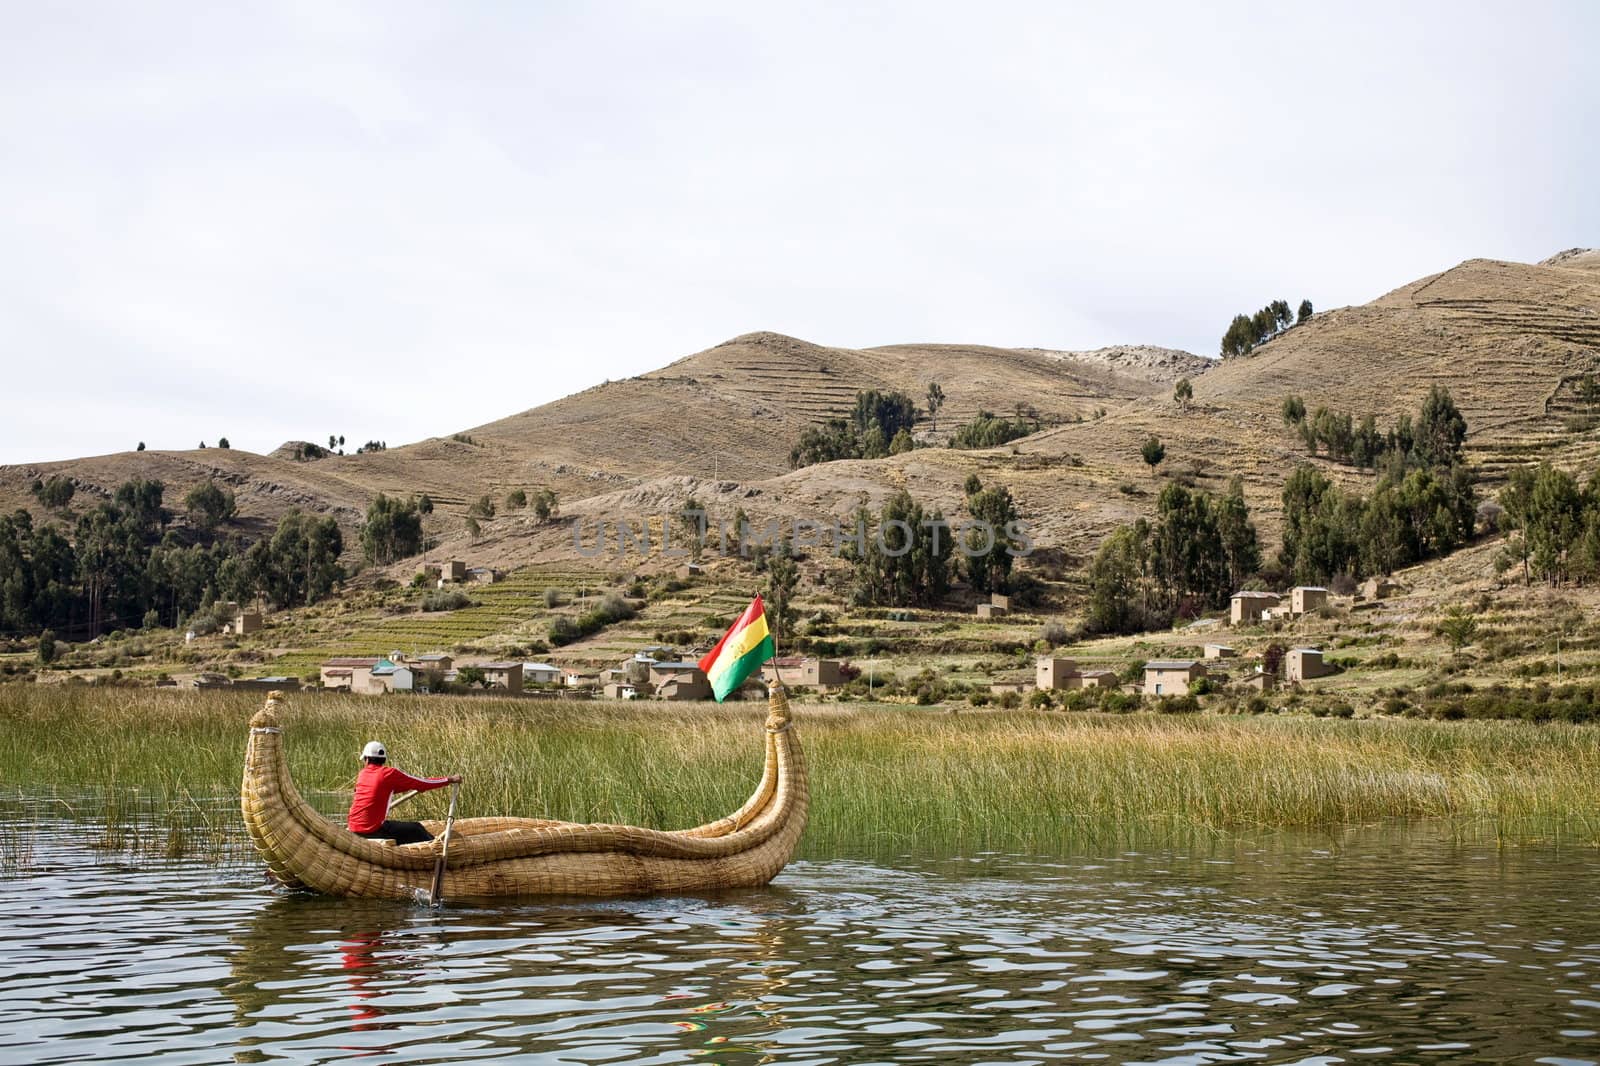 The Uros, an indigenous people predating the Incas, live on Lake Titicaca upon floating islands fashioned from this plant. The Uros also use the Totora plant to make boats (balsas) of the bundled dried plant reeds.